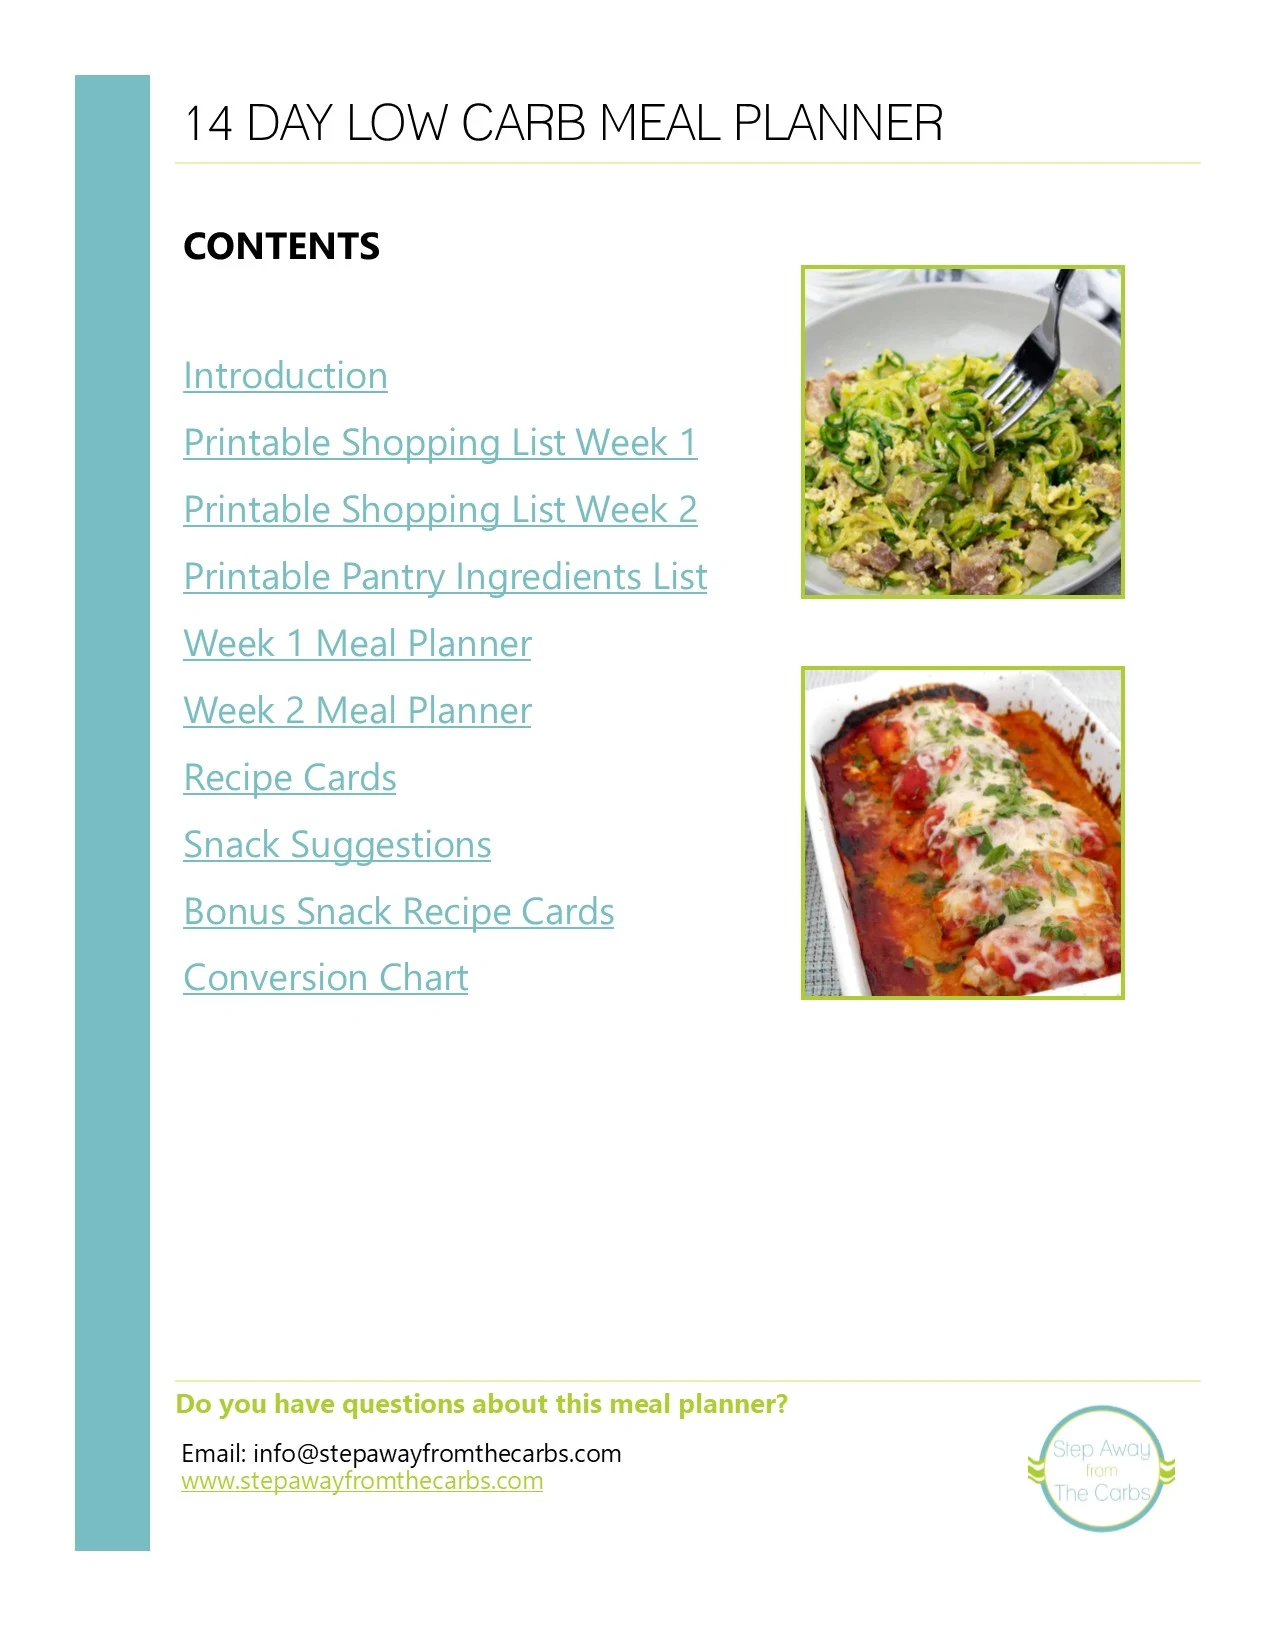 Welcome to the information page for my 14 Day Low Carb Meal Planner!!! Recipe cards, shopping lists, snack recommendations and more!